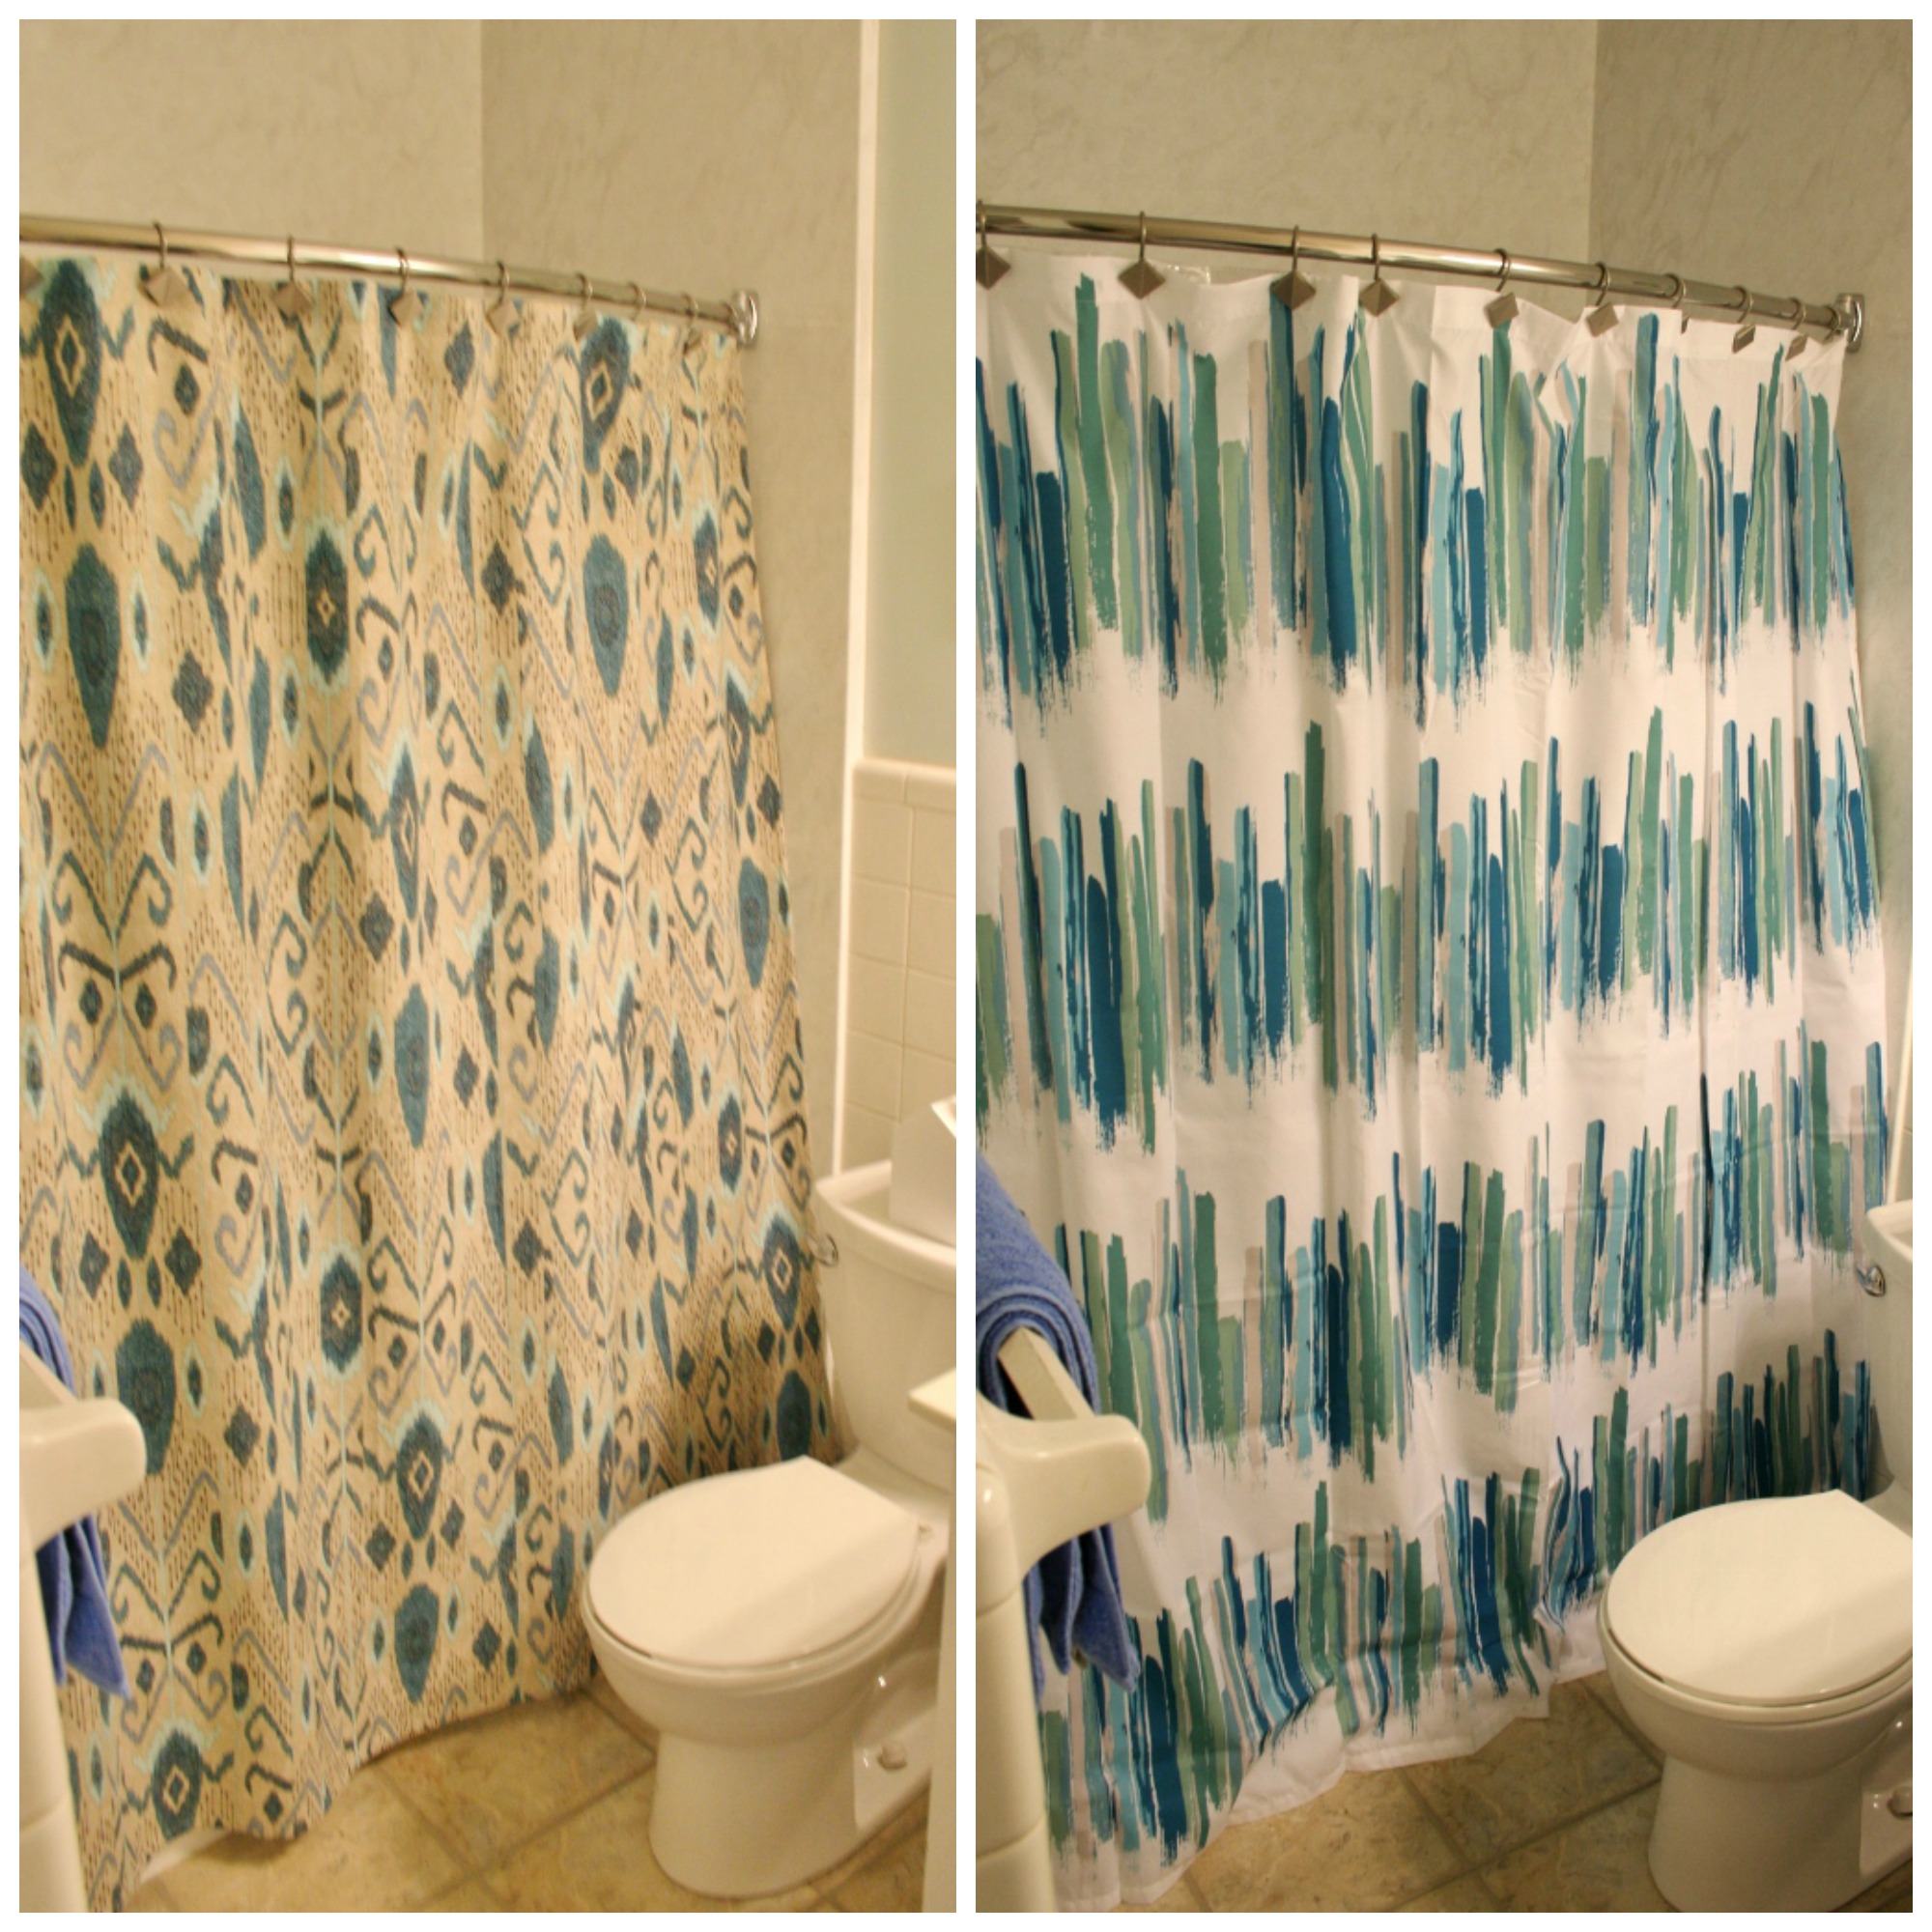 Shower Curtains: Ikat or Colorful Modern - Rhapsody in Rooms